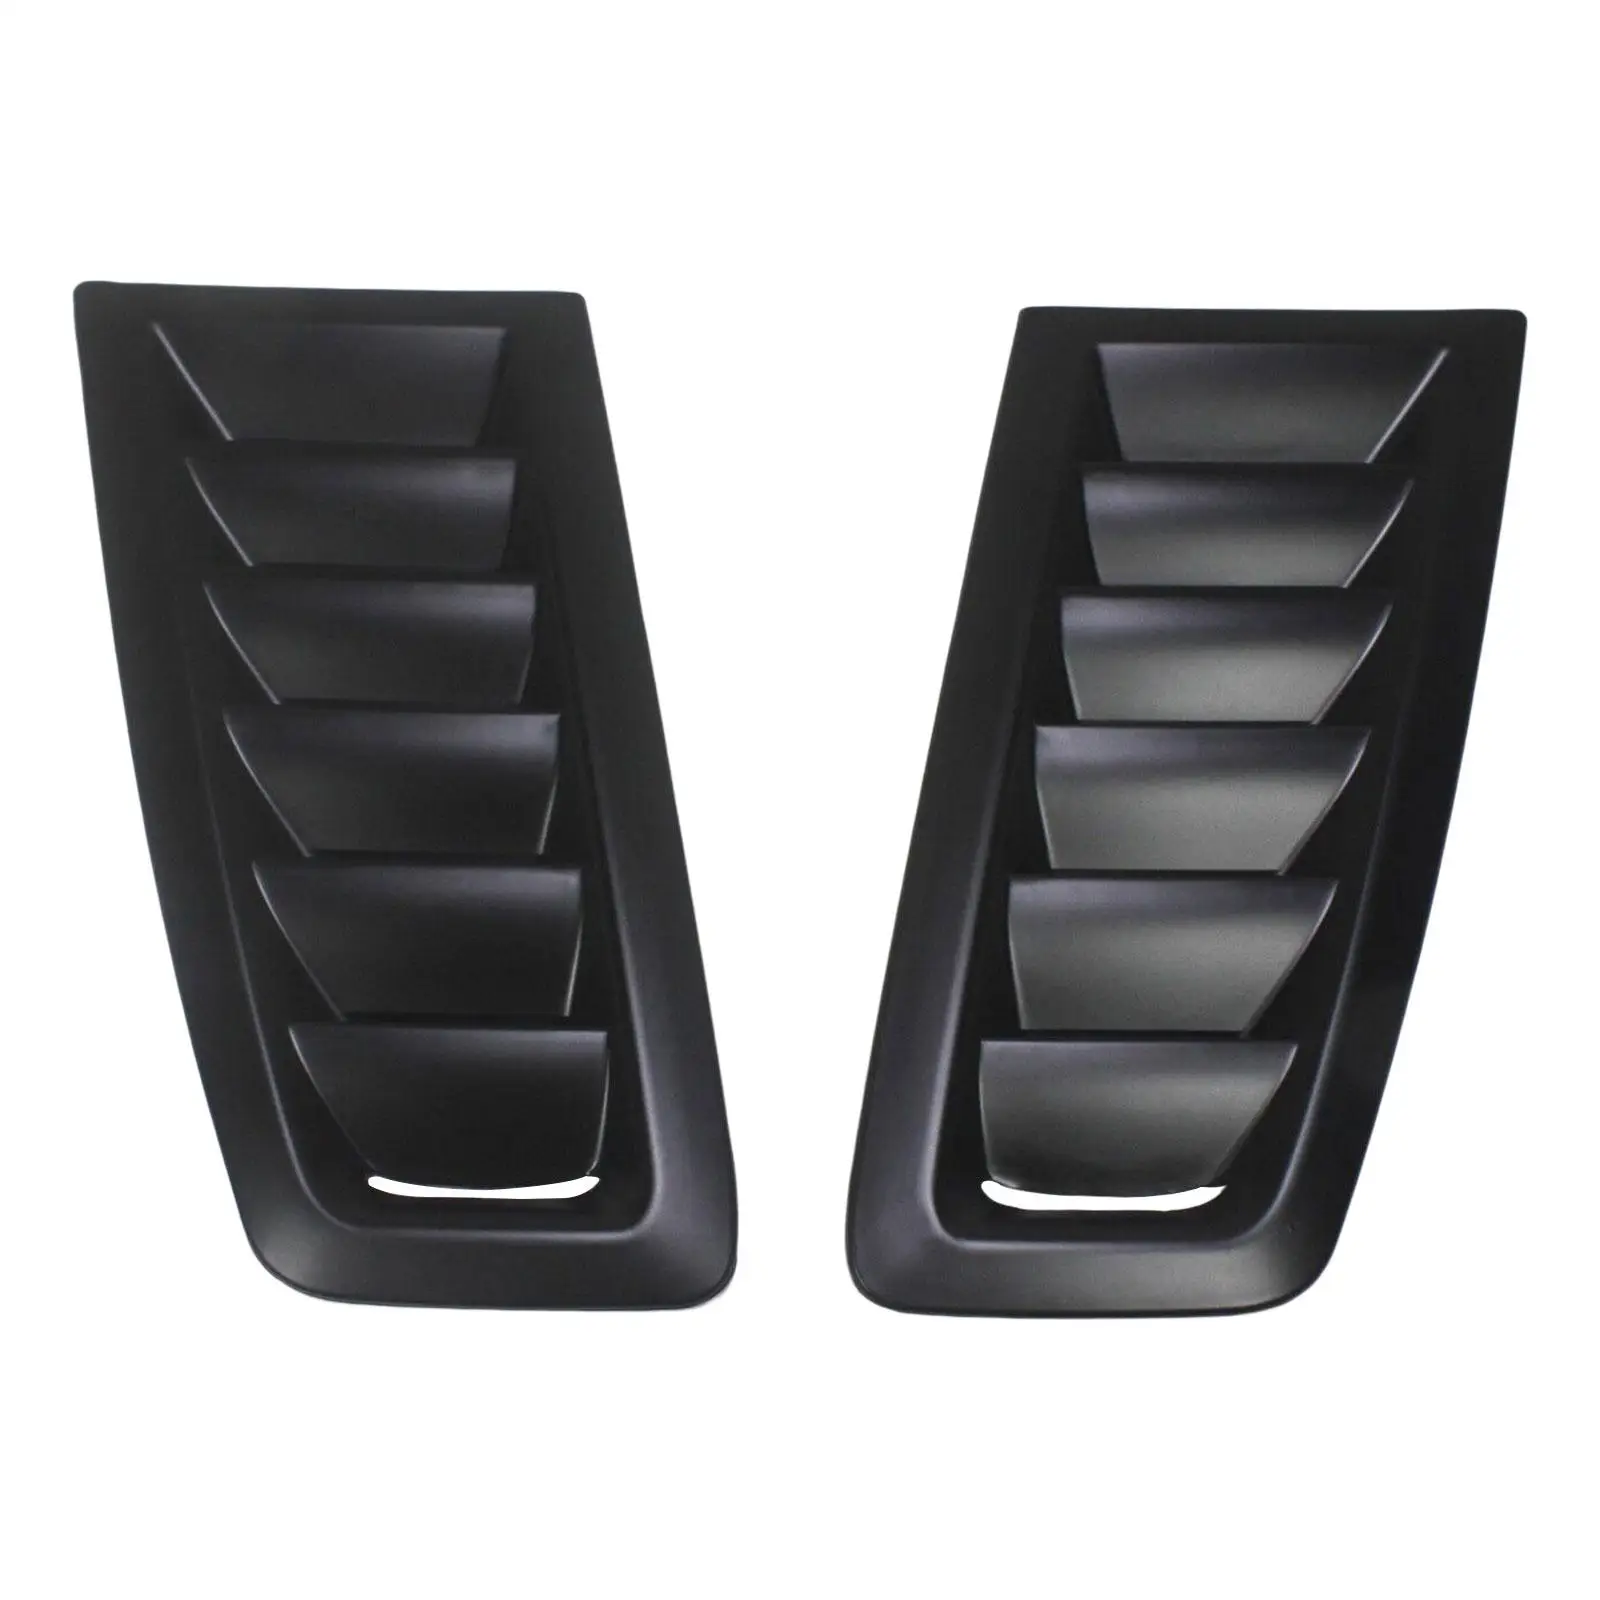 2x Hood Vent Scoop Kit Bonnet Vents Hood Trim Air Flow Intake Louvers Hood Trim Cover for Ford Focus RS Style Decorative